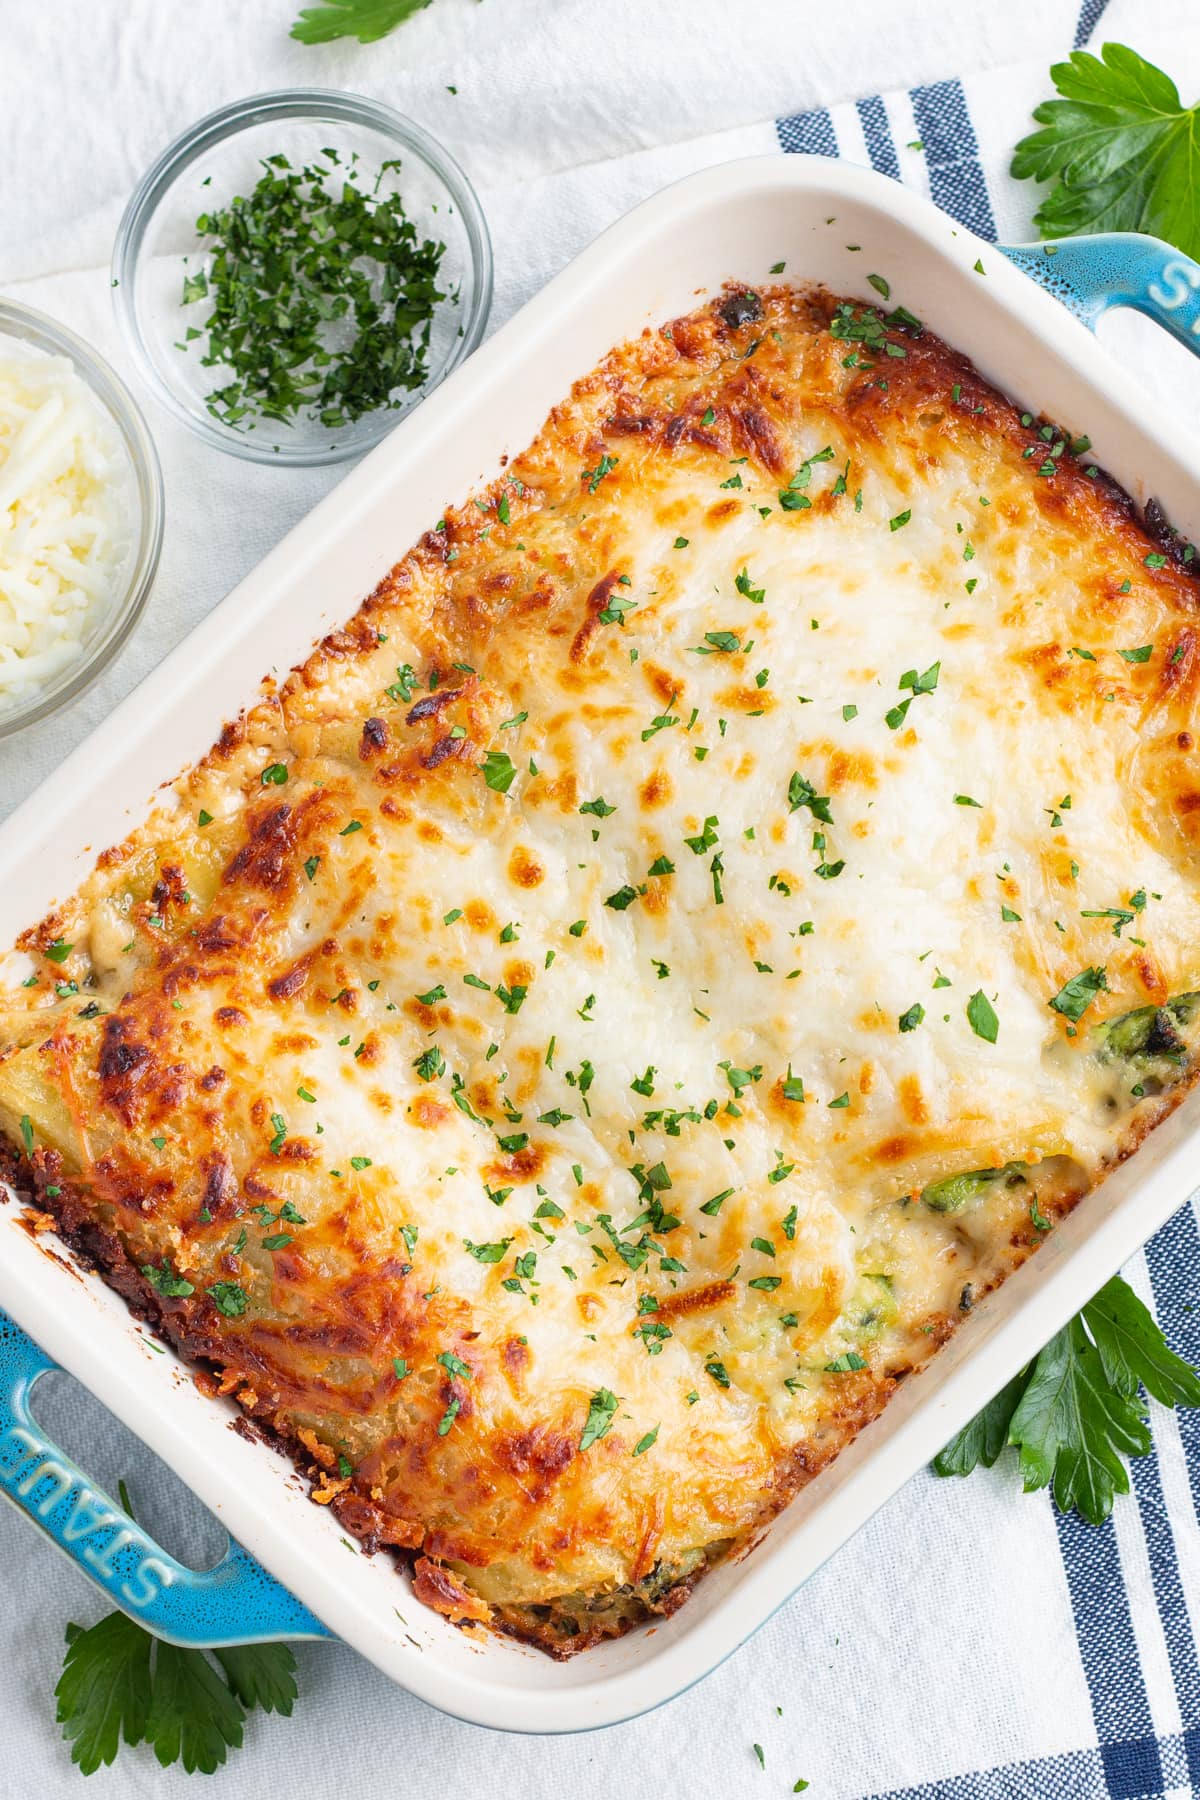 Overhead view of a dish of cheesy chicken and spinach manicotti in a baking dish.